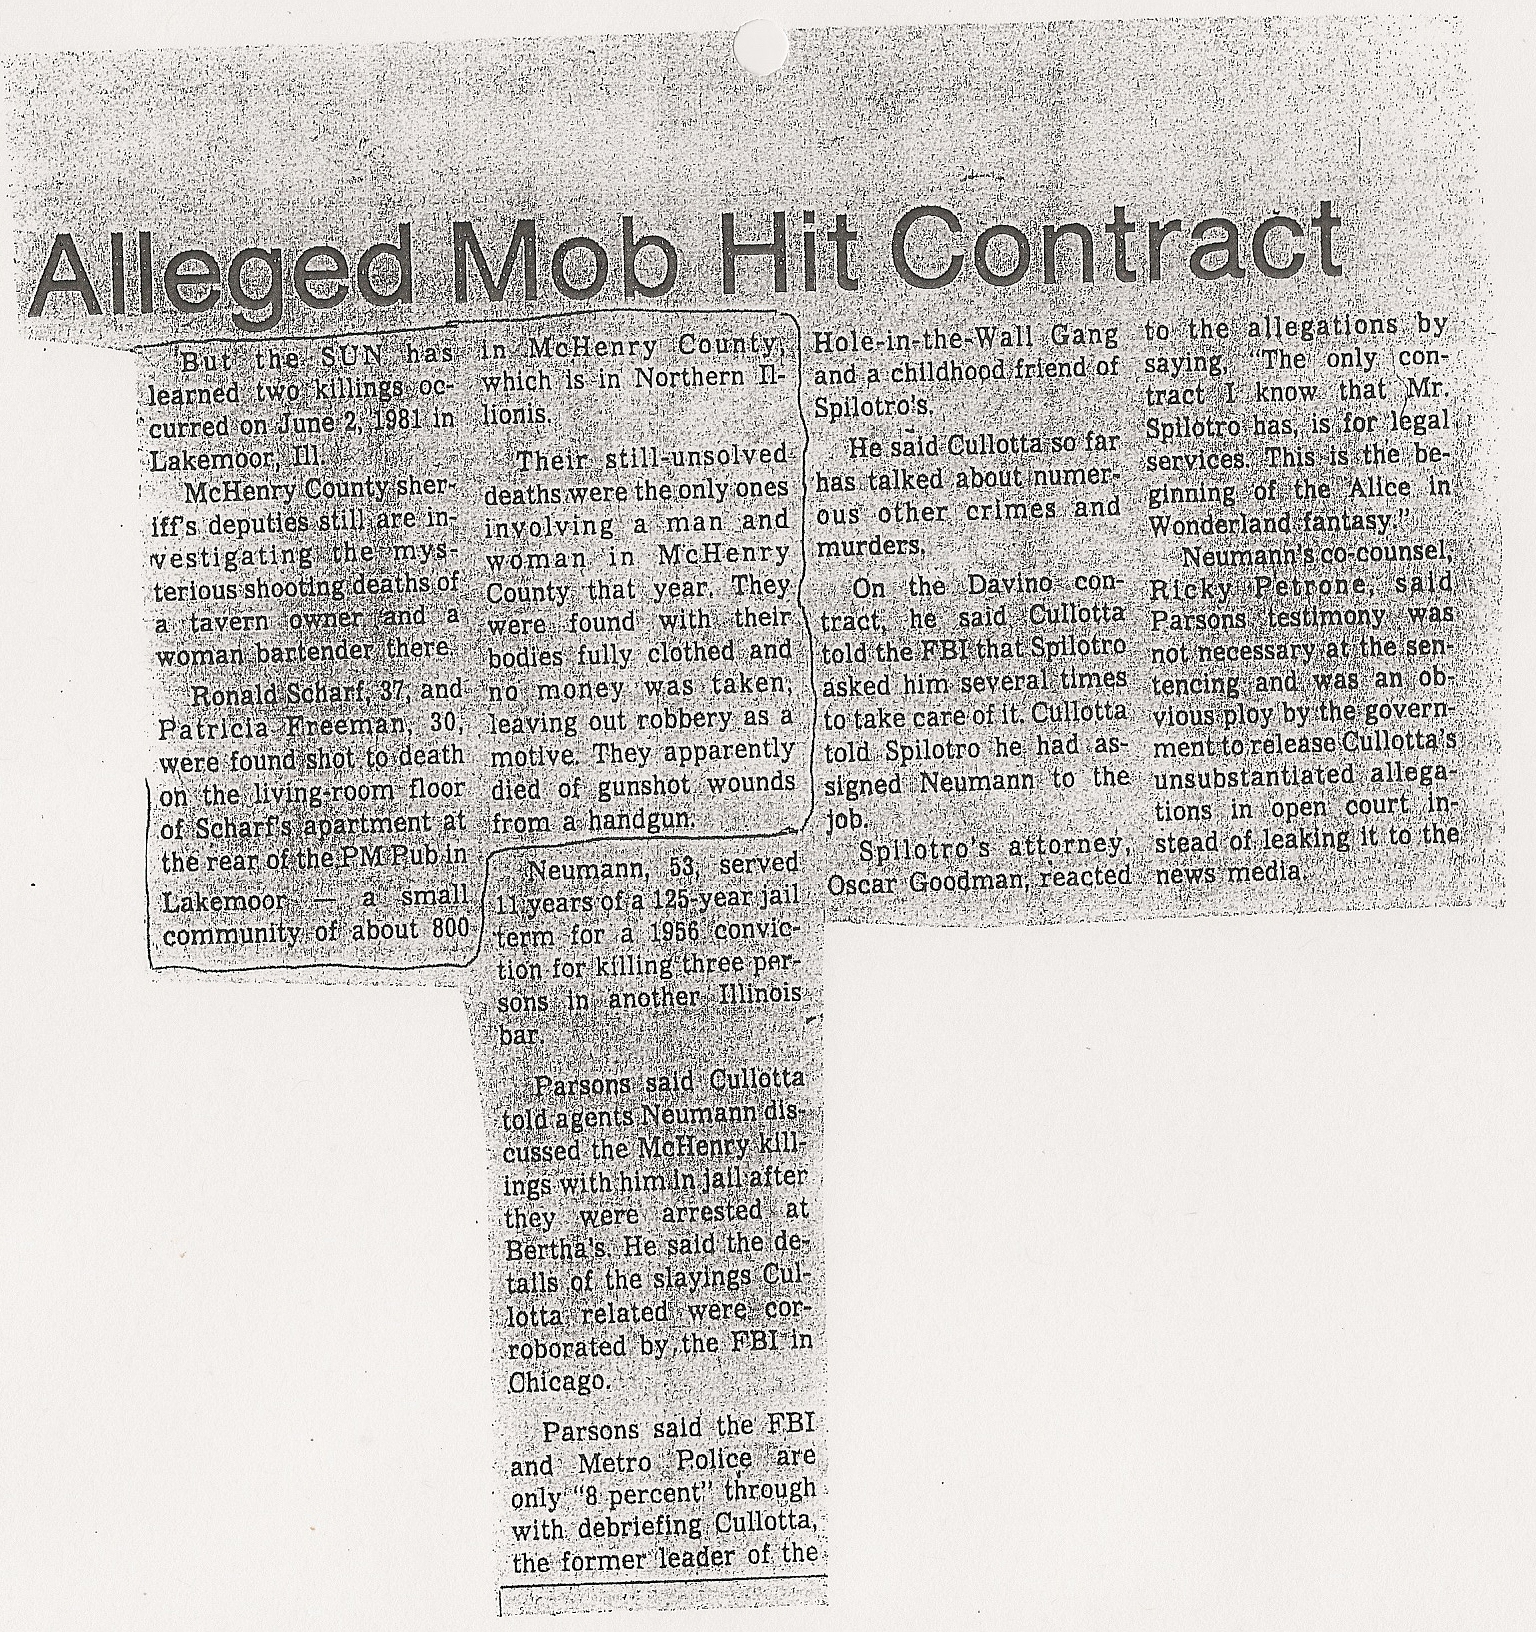 McHenry County 1981 Las Vegas Sun Alleged Mob Hit Contract - McHenry County 1981